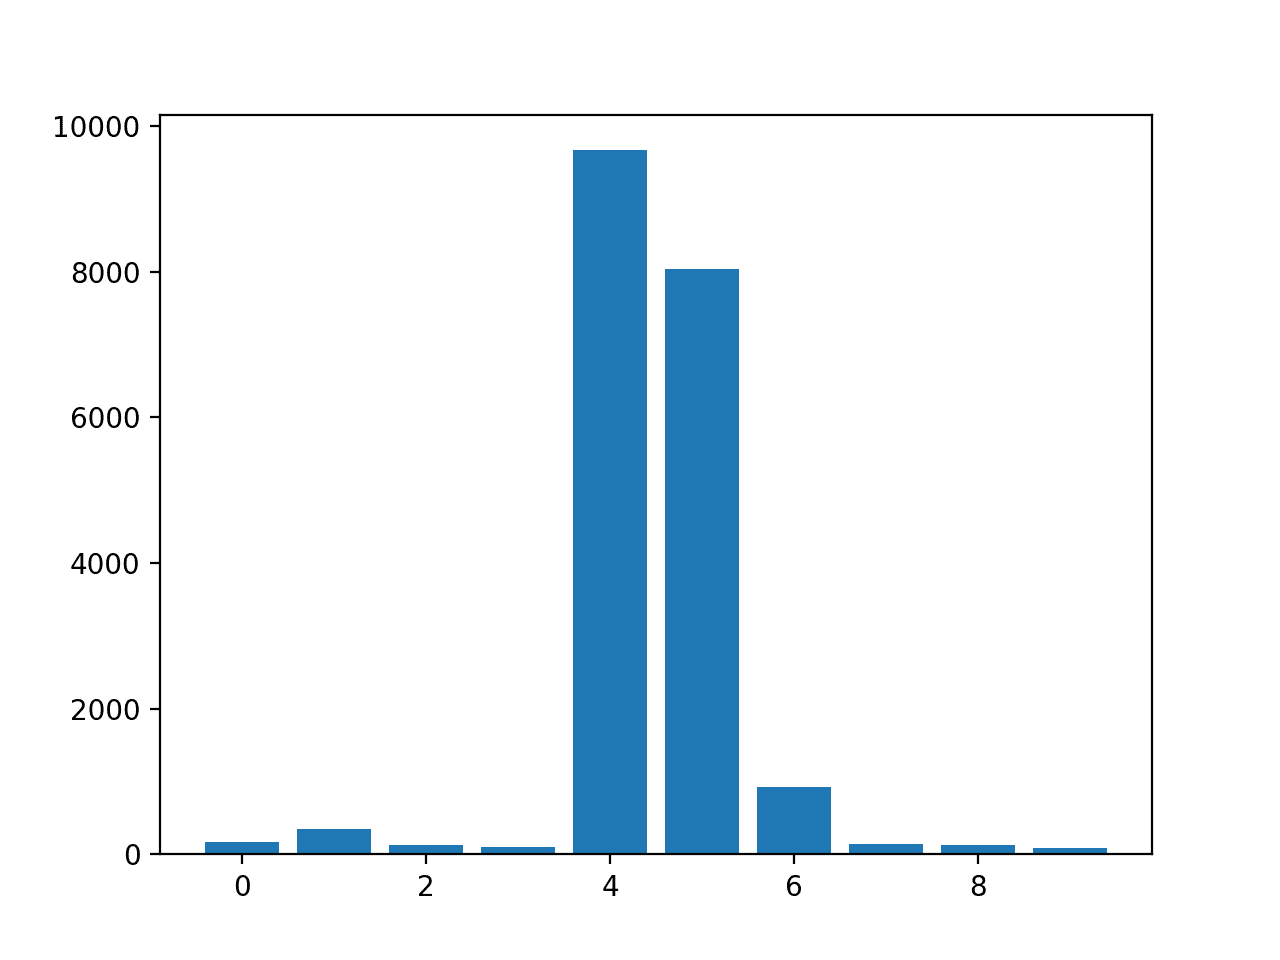 Bar Chart of KNeighborsRegressor With Permutation Feature Importance Scores